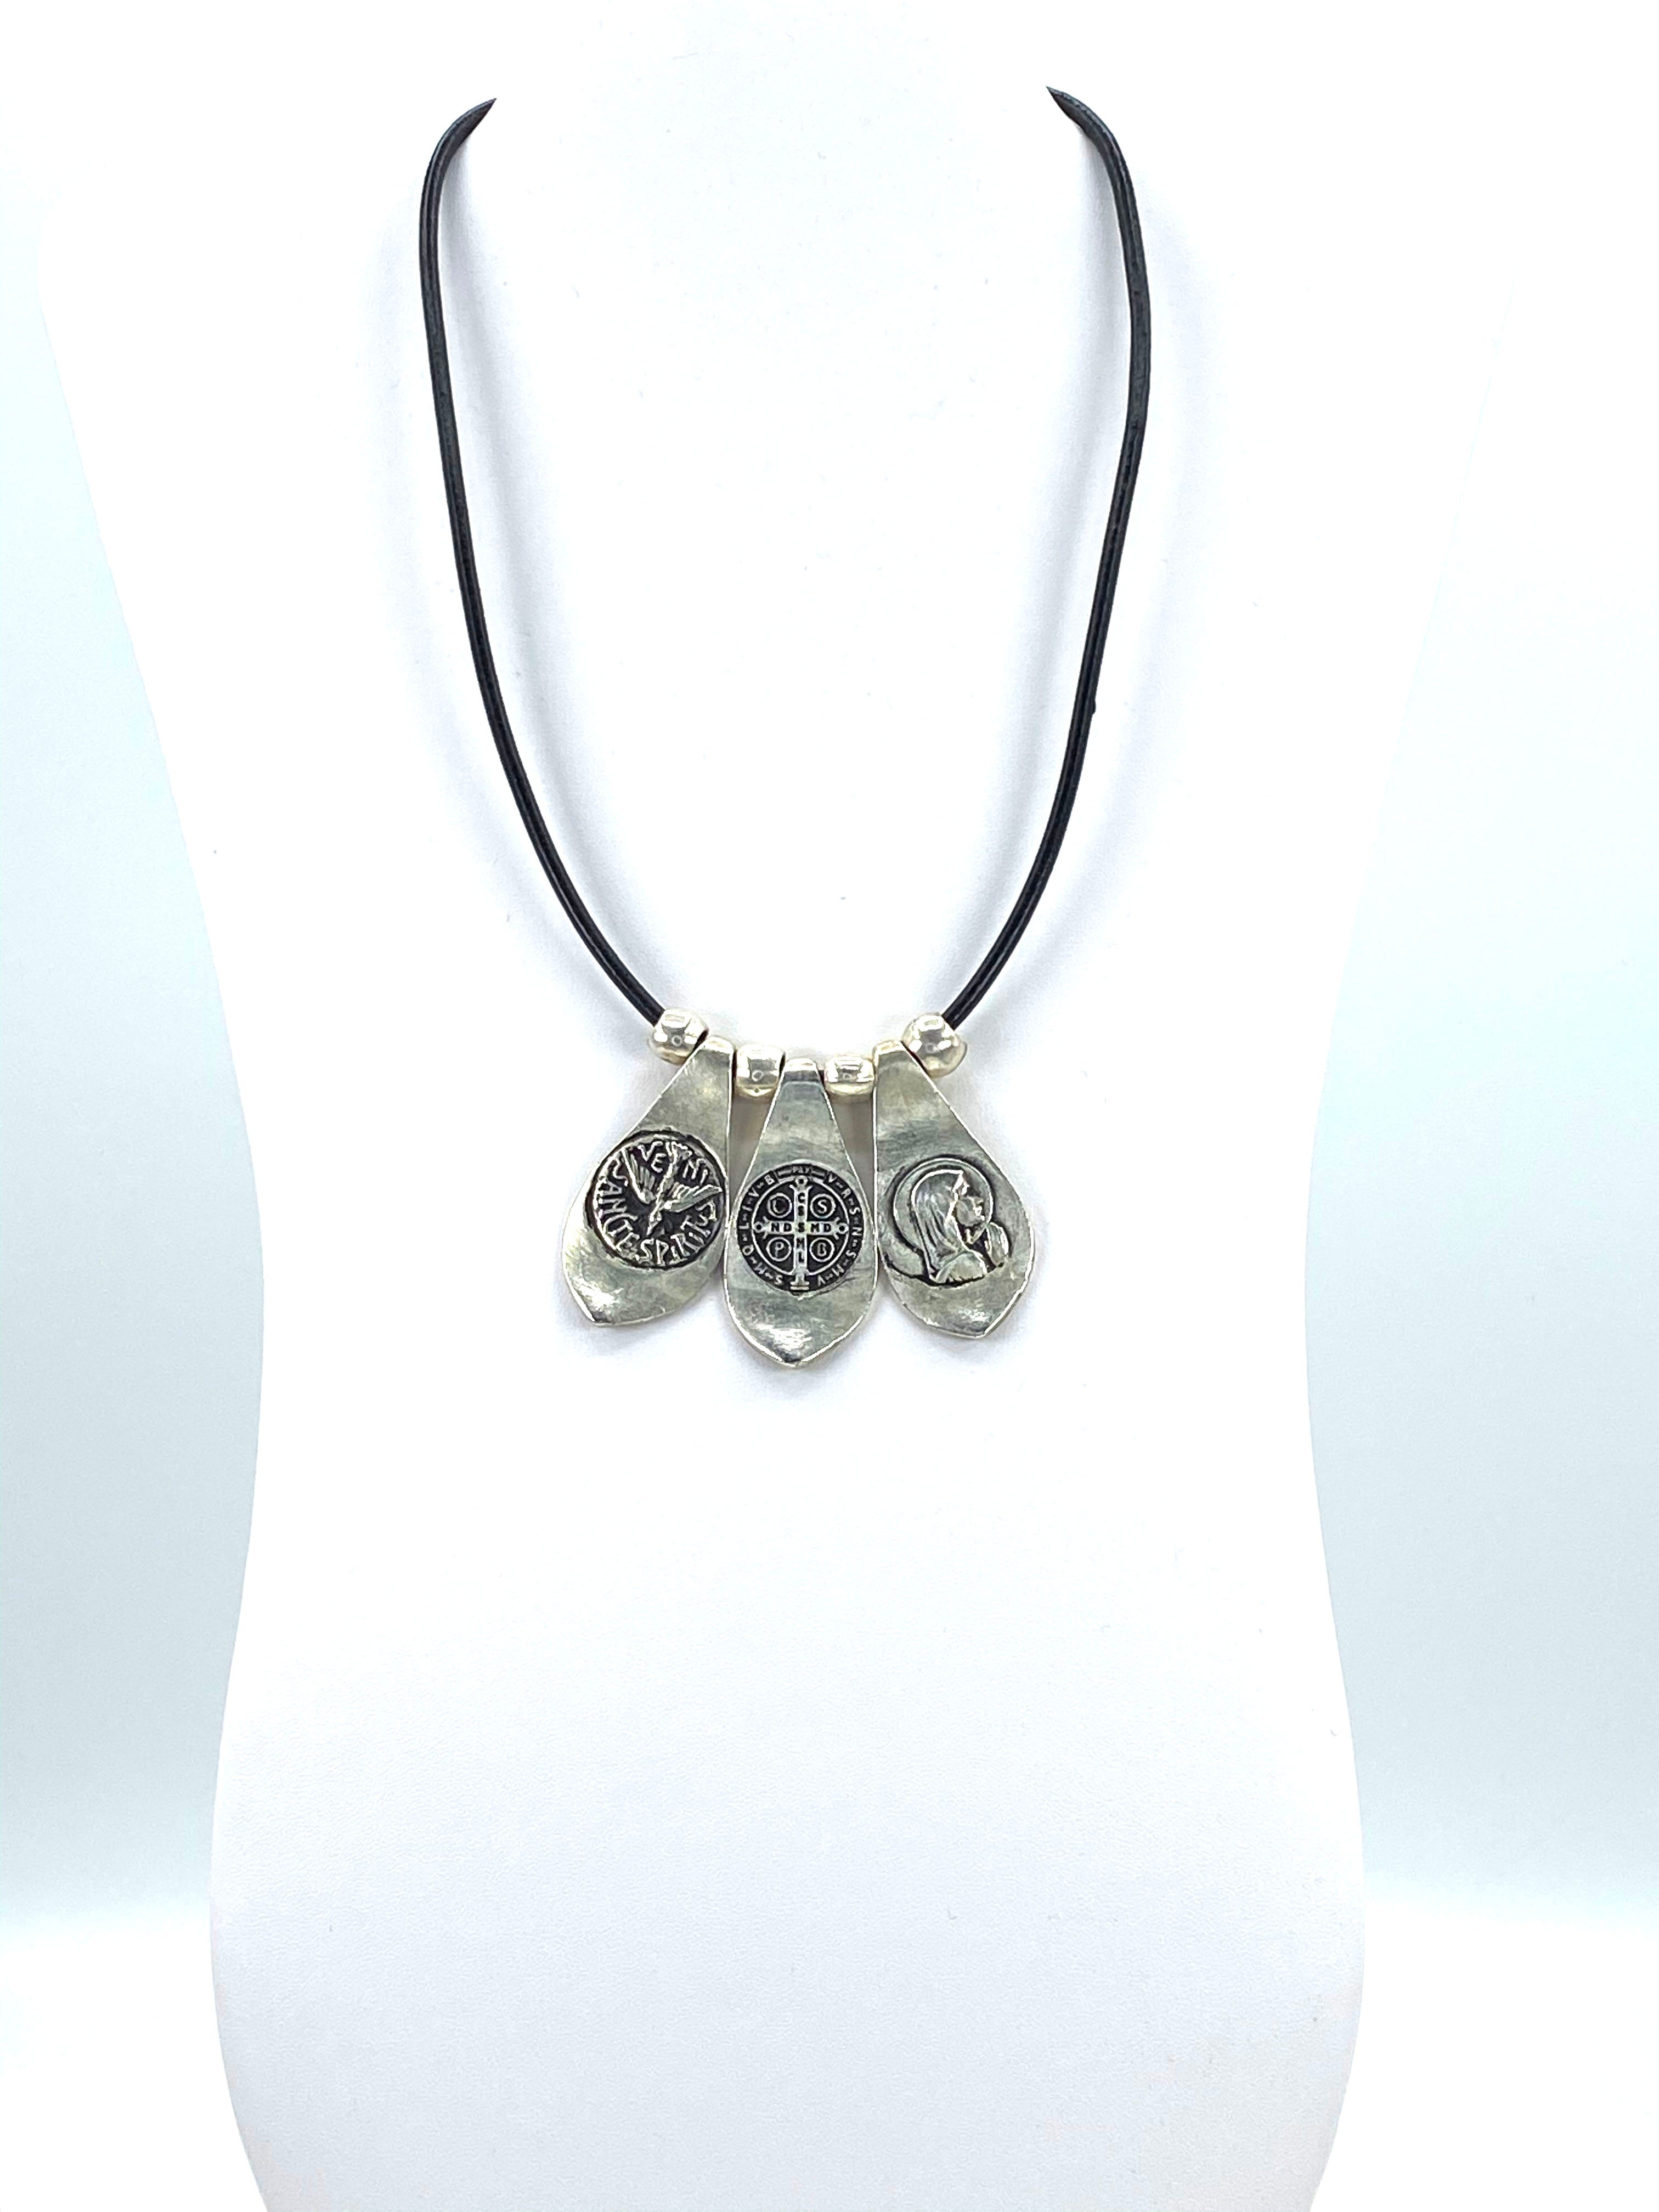 Vintage Necklace of The Virgin Mary, St Benedict, and the Holy Spirit.  Handmade Jewelry by Graciela's Collection